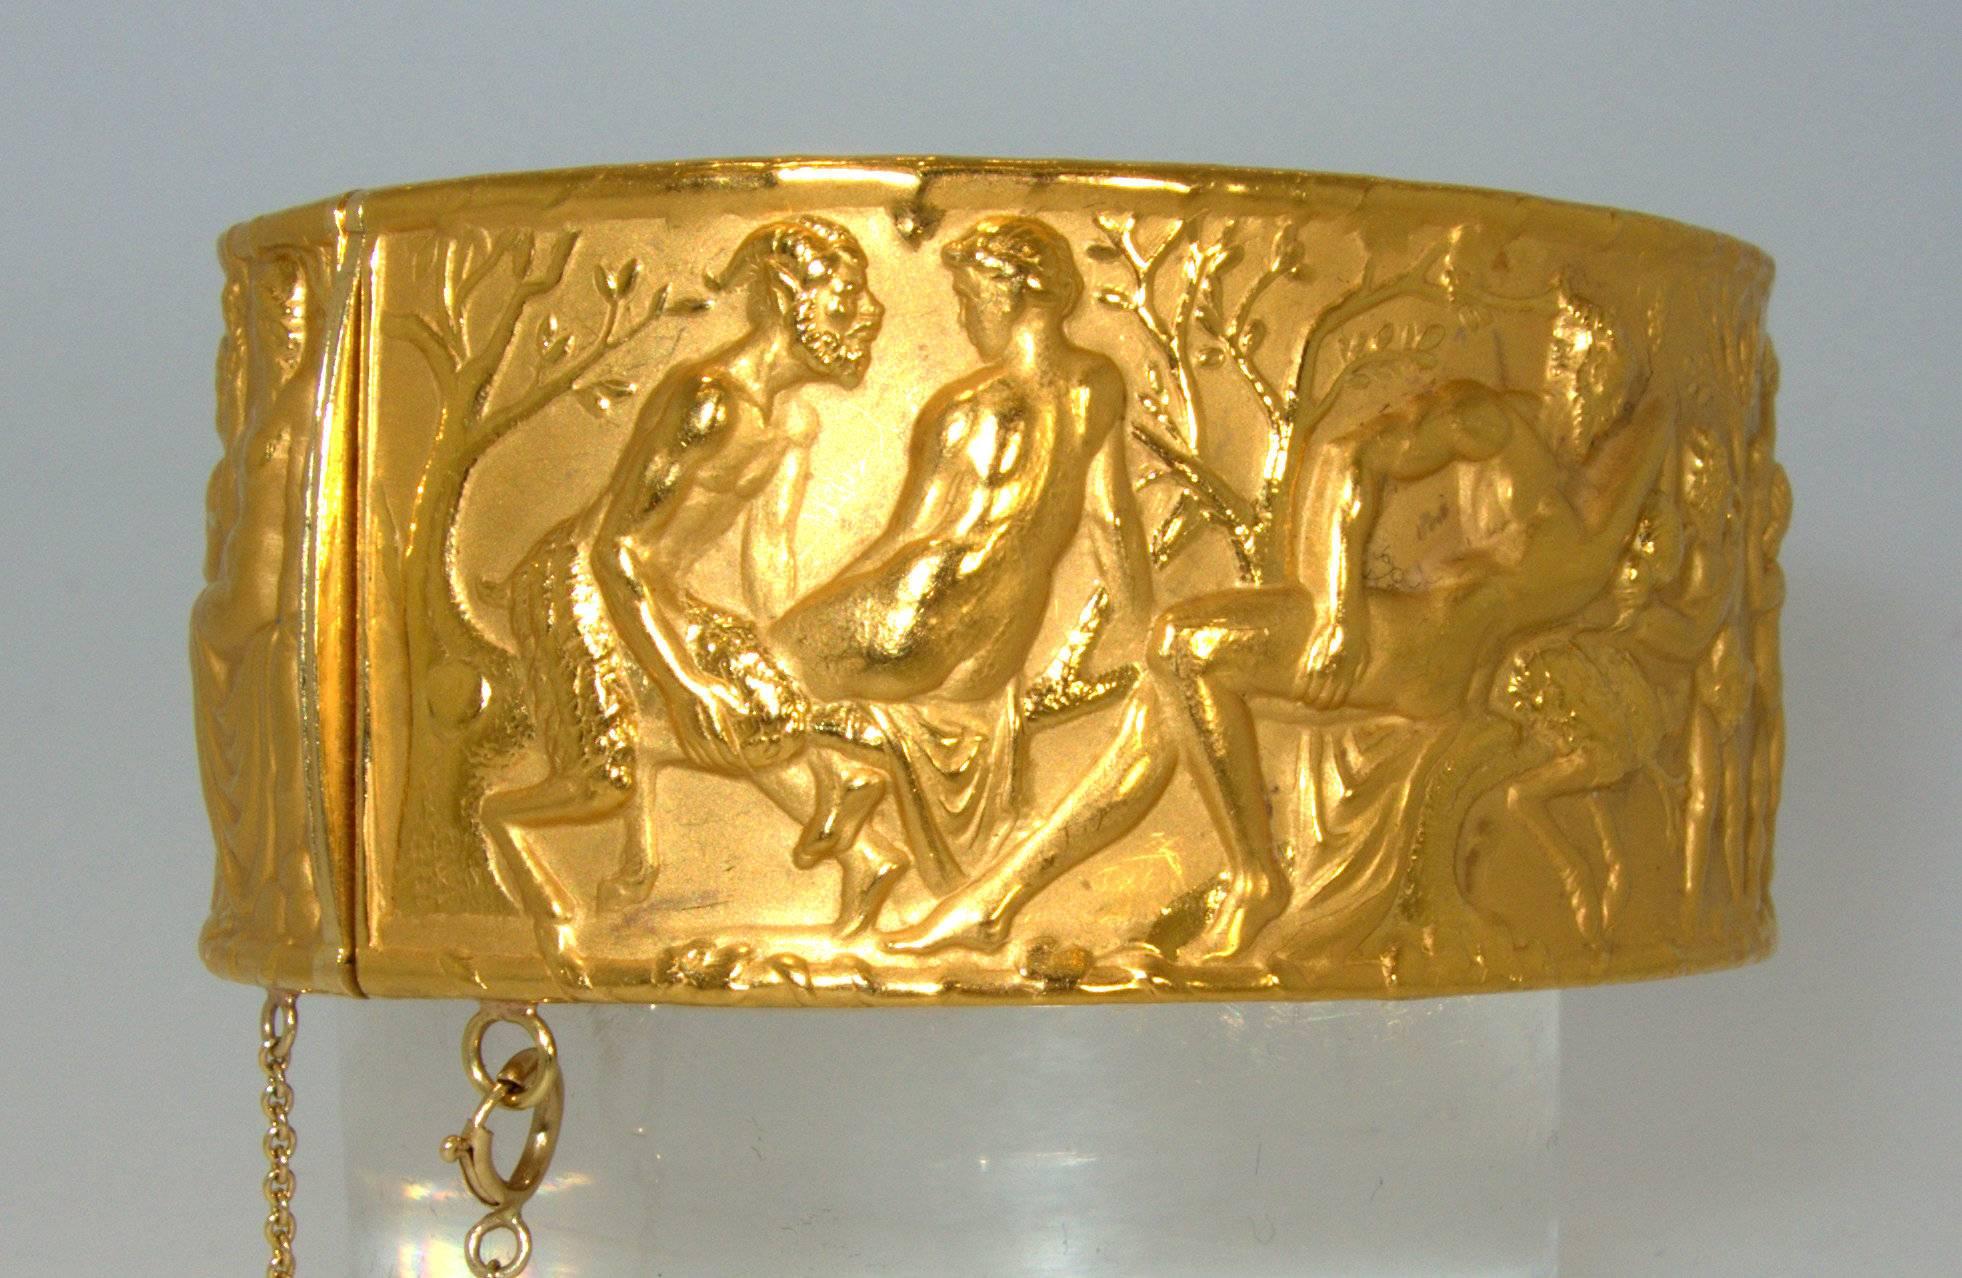  18K yellow gold with an erotic motif of different scenes inspired by A 
Midnight's Summer's Dream. This  bangle has an approximately  7 1/4 inches inside circumference and is 1.25 inches wide. It weighs 1.63 troy ounces.